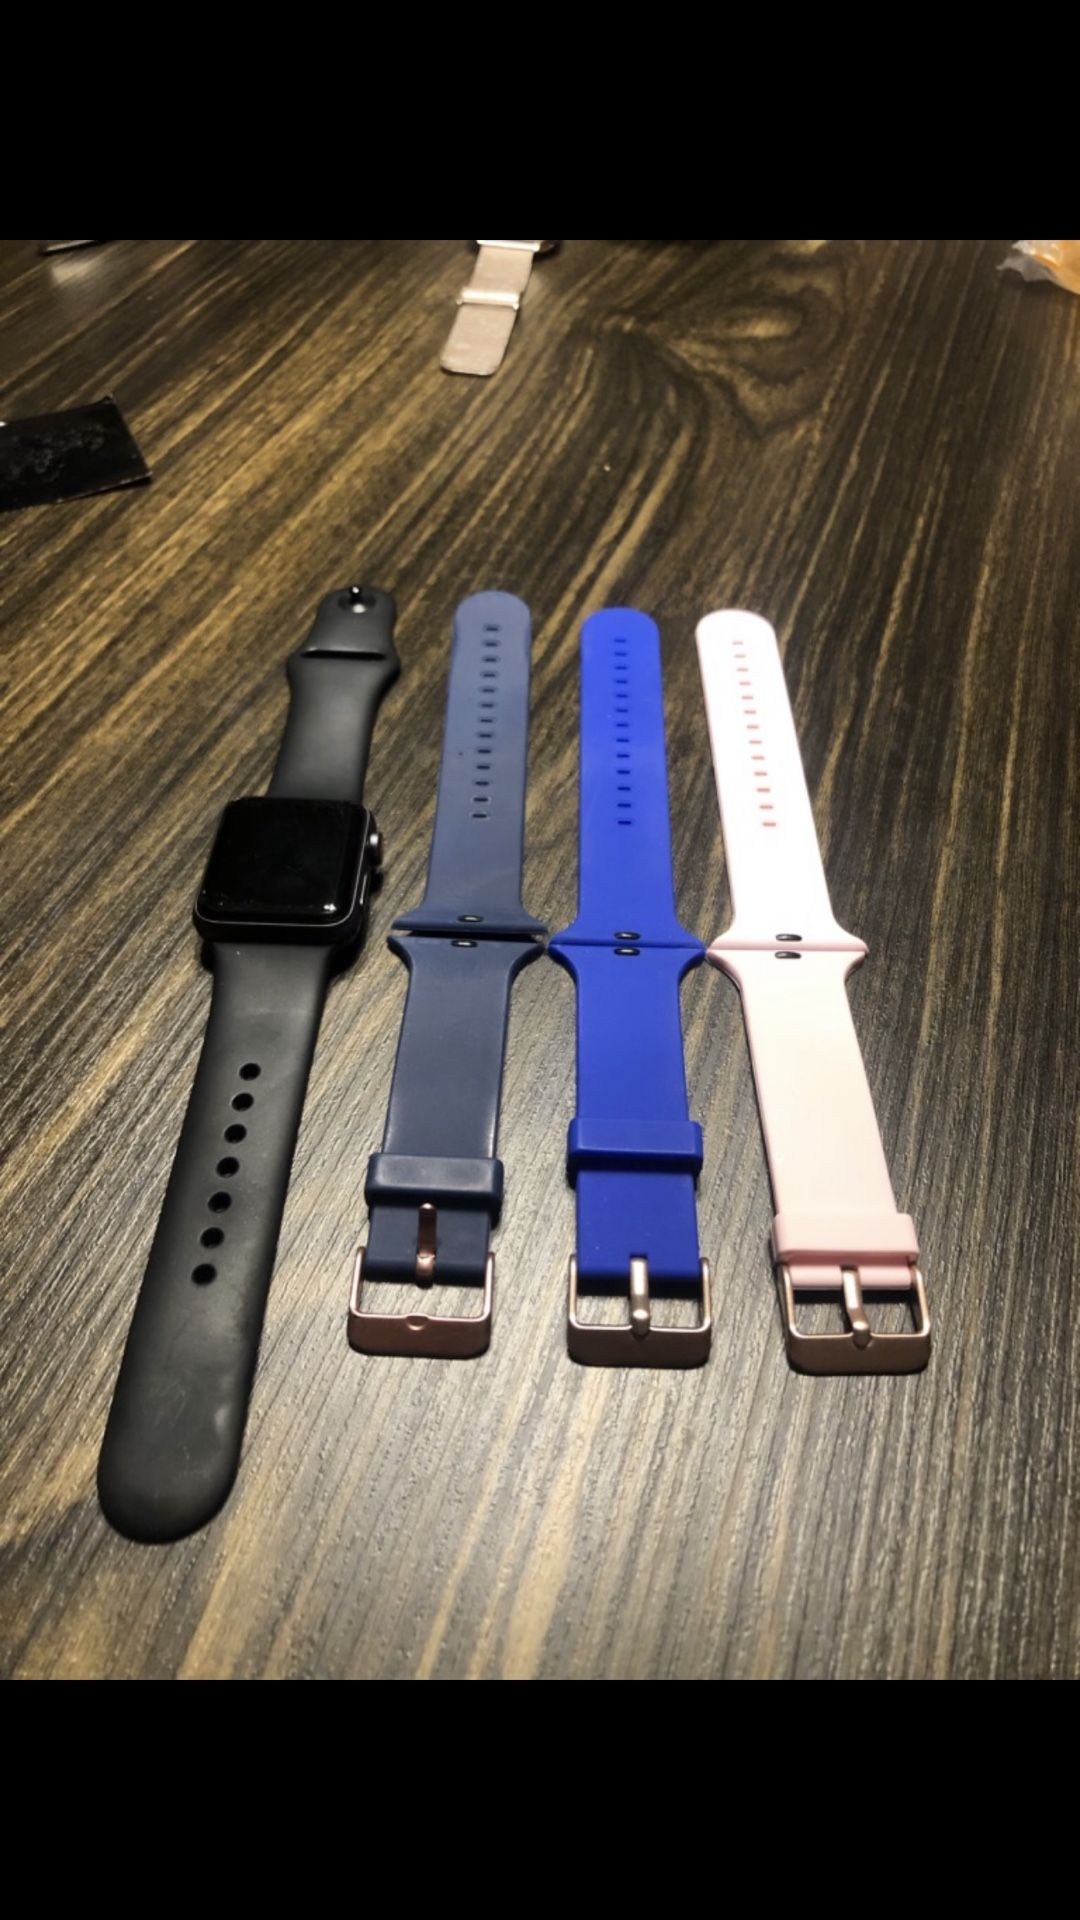 Apple Watch series 3 cellular and gps 38mm